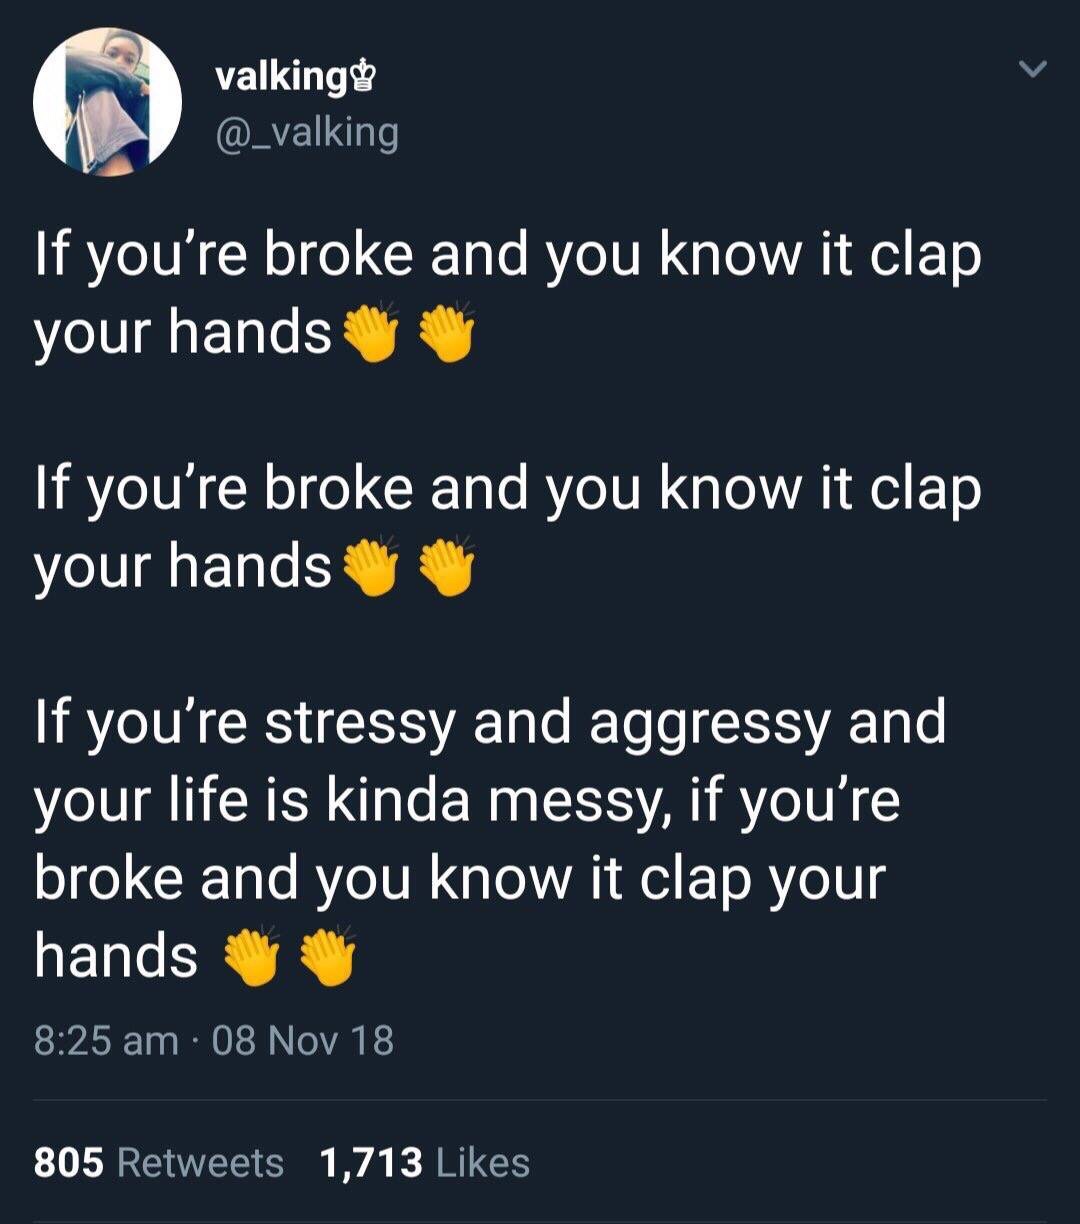 memes - if your stressed and you know it clap your hands - valking valking If you're broke and you know it clap your hands If you're broke and you know it clap your hands If you're stressy and aggressy and your life is kinda messy, if you're broke and you